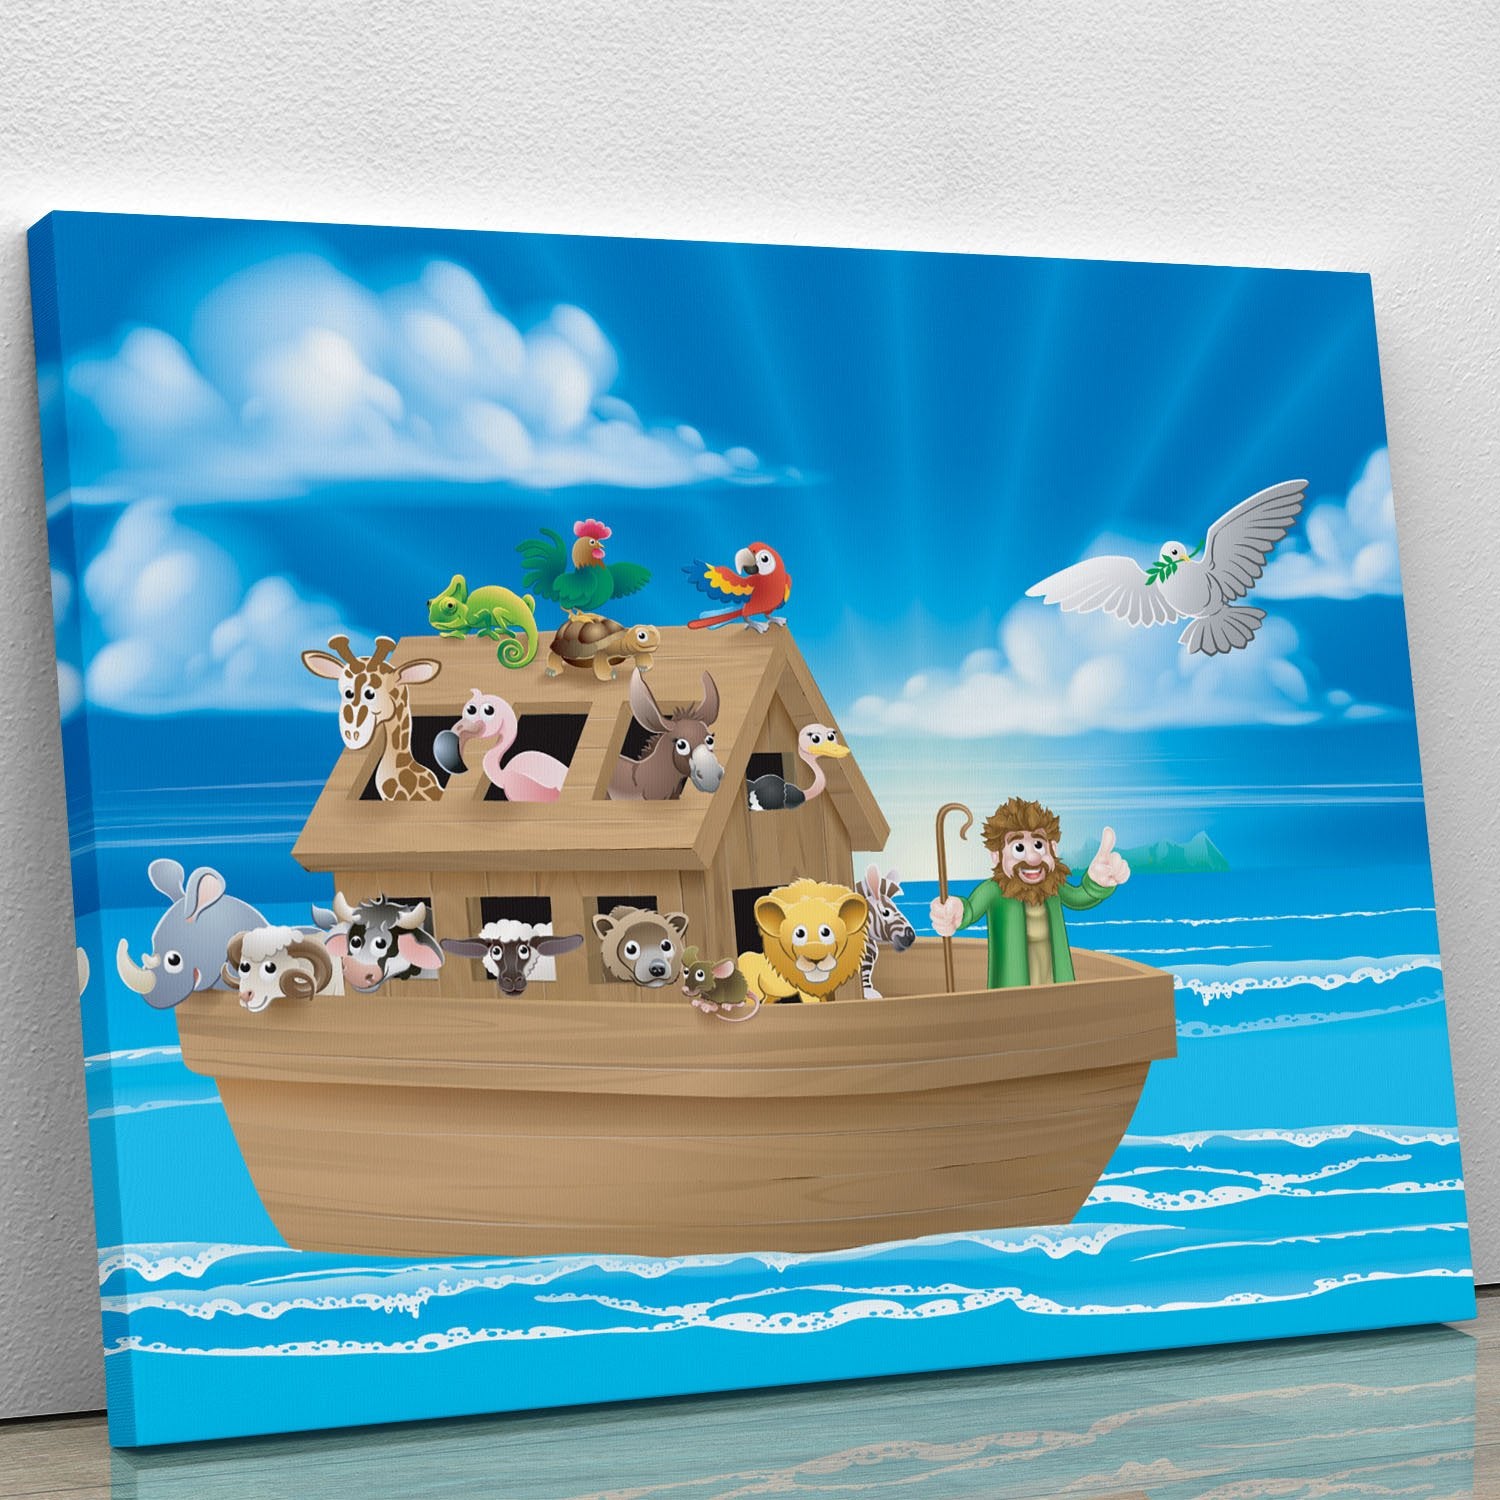 Cartoon childrens illustration of the Christian Bible story of Noah Canvas Print or Poster